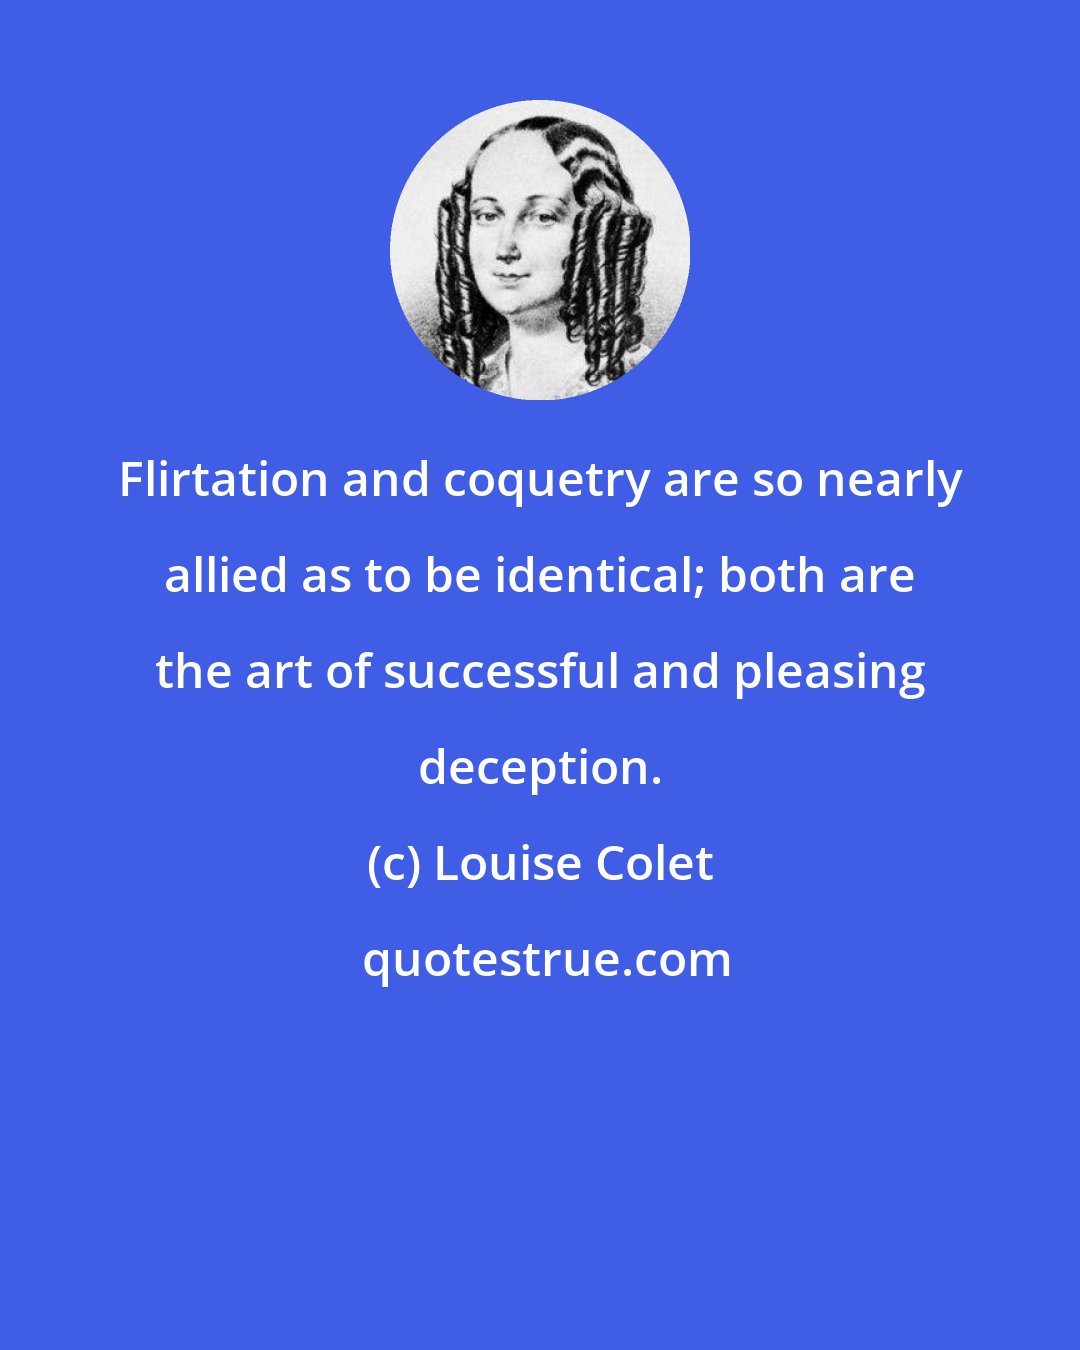 Louise Colet: Flirtation and coquetry are so nearly allied as to be identical; both are the art of successful and pleasing deception.